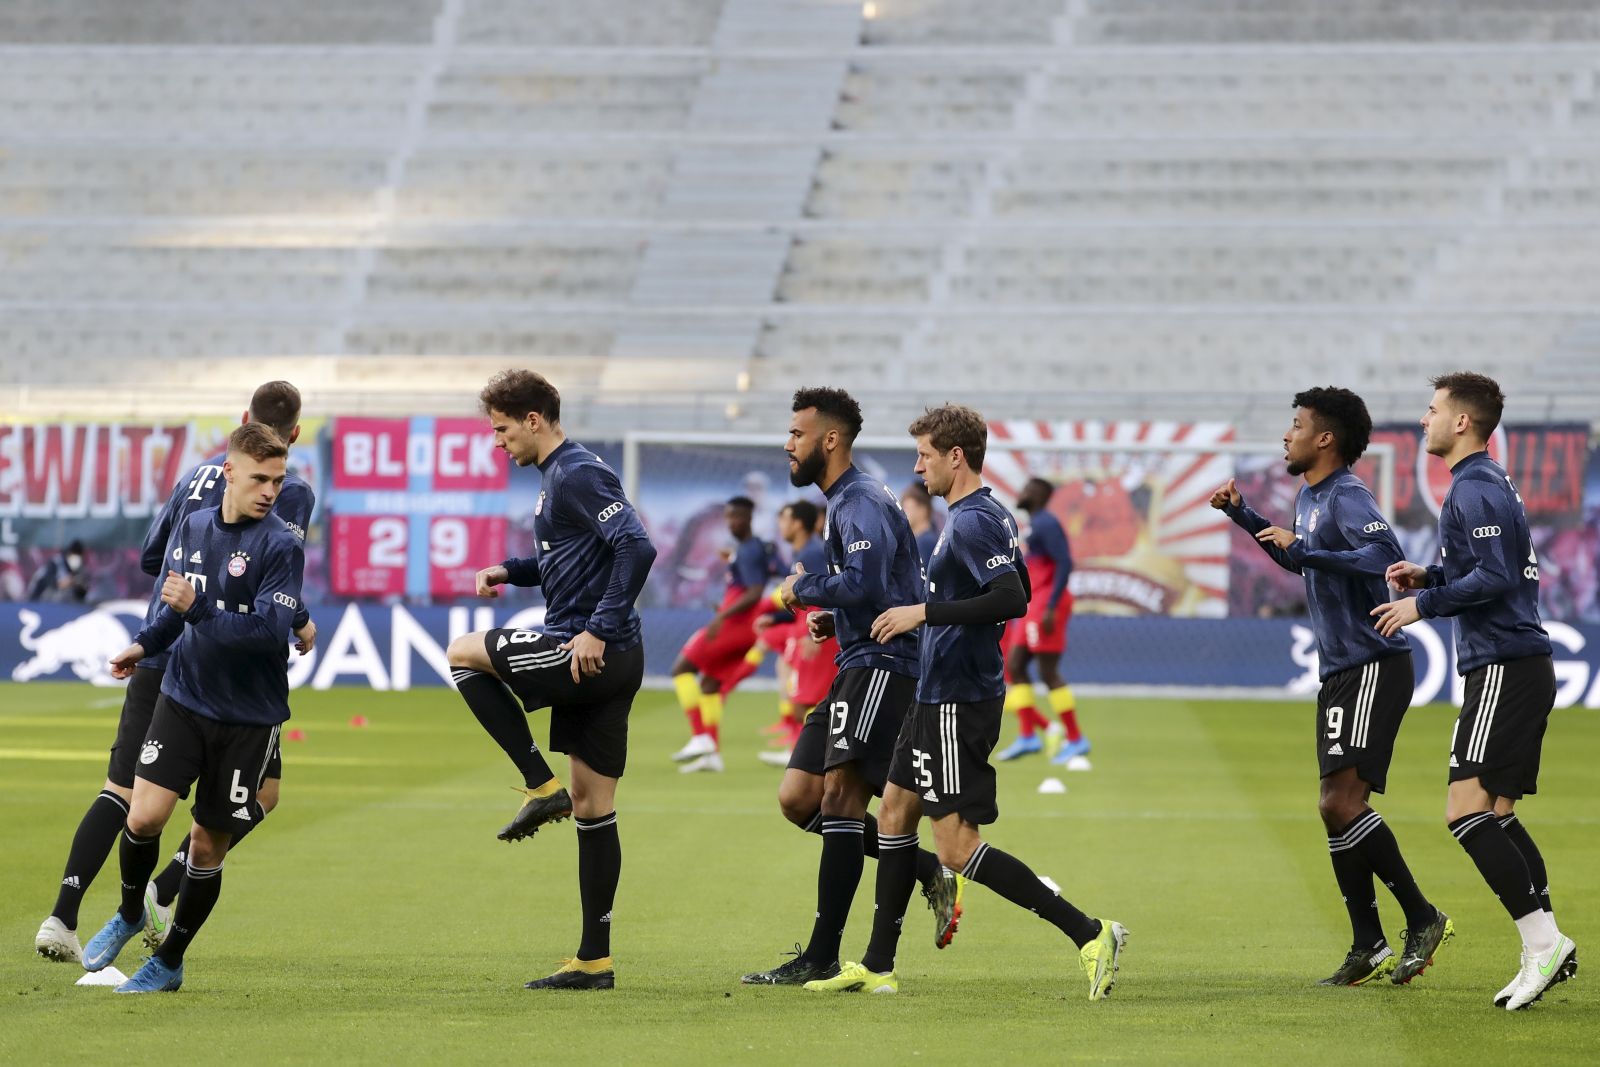 epa09113727 Bayern's players warm up prior to the German Bundesliga soccer match between RB Leipzig and FC Bayern Munich at Red Bull Arena in Leipzig, Germany, 03 April 2021.  EPA/FILIP SINGER / POOL DFL regulations prohibit any use of photographs as image sequences and/or quasi-video.